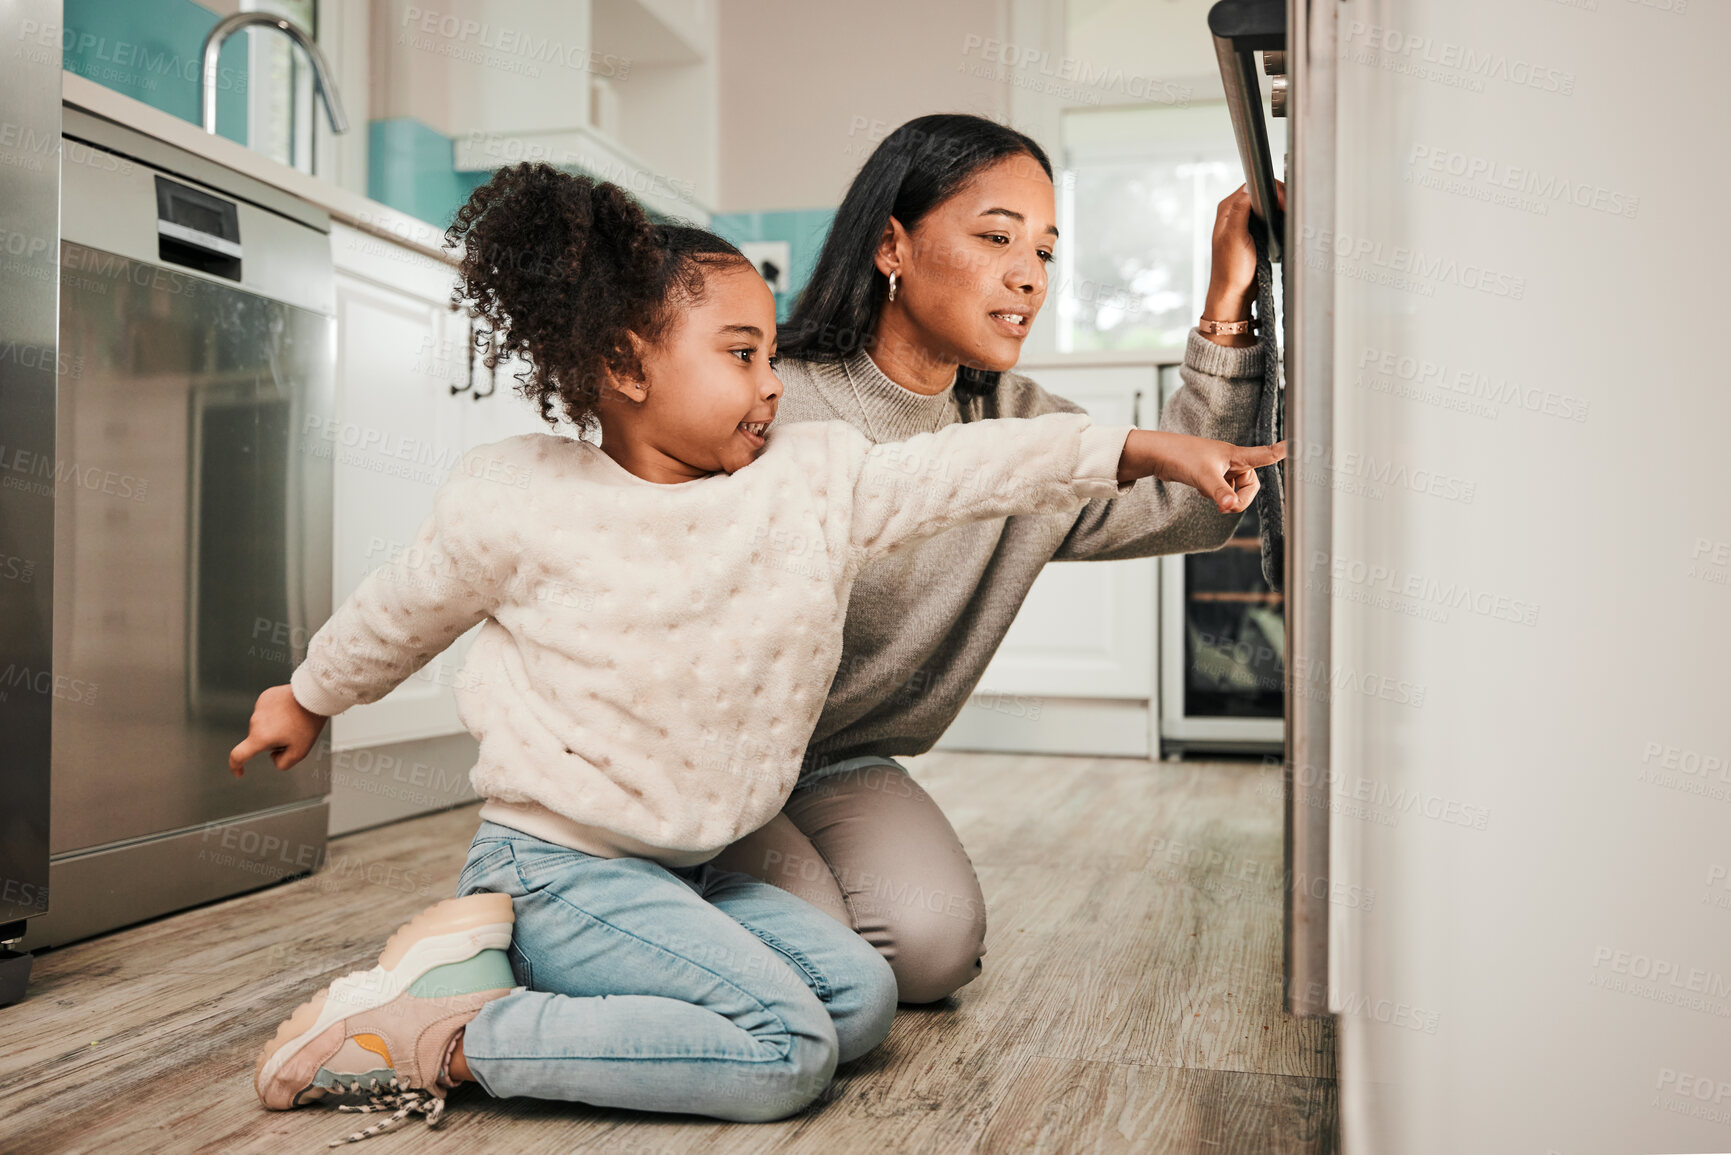 Buy stock photo Oven, teaching and parent cooking with child in kitchen for development, care and learning a recipe together at home. Stove, curious and kid help mom or mother prepare food, meal or baking in house